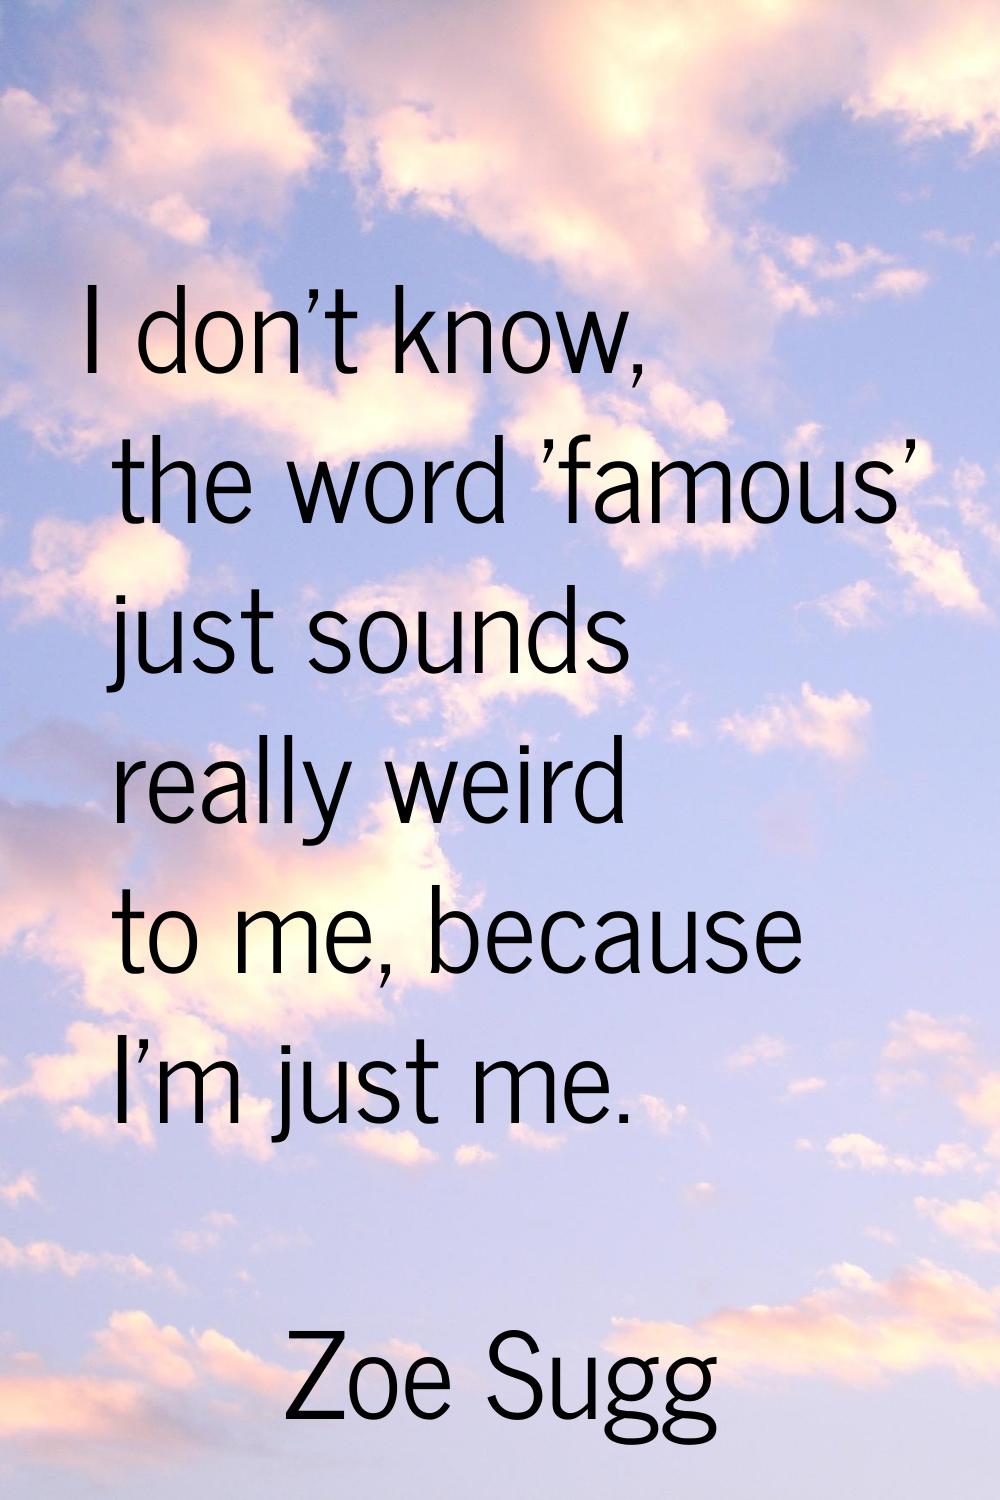 I don't know, the word 'famous' just sounds really weird to me, because I'm just me.